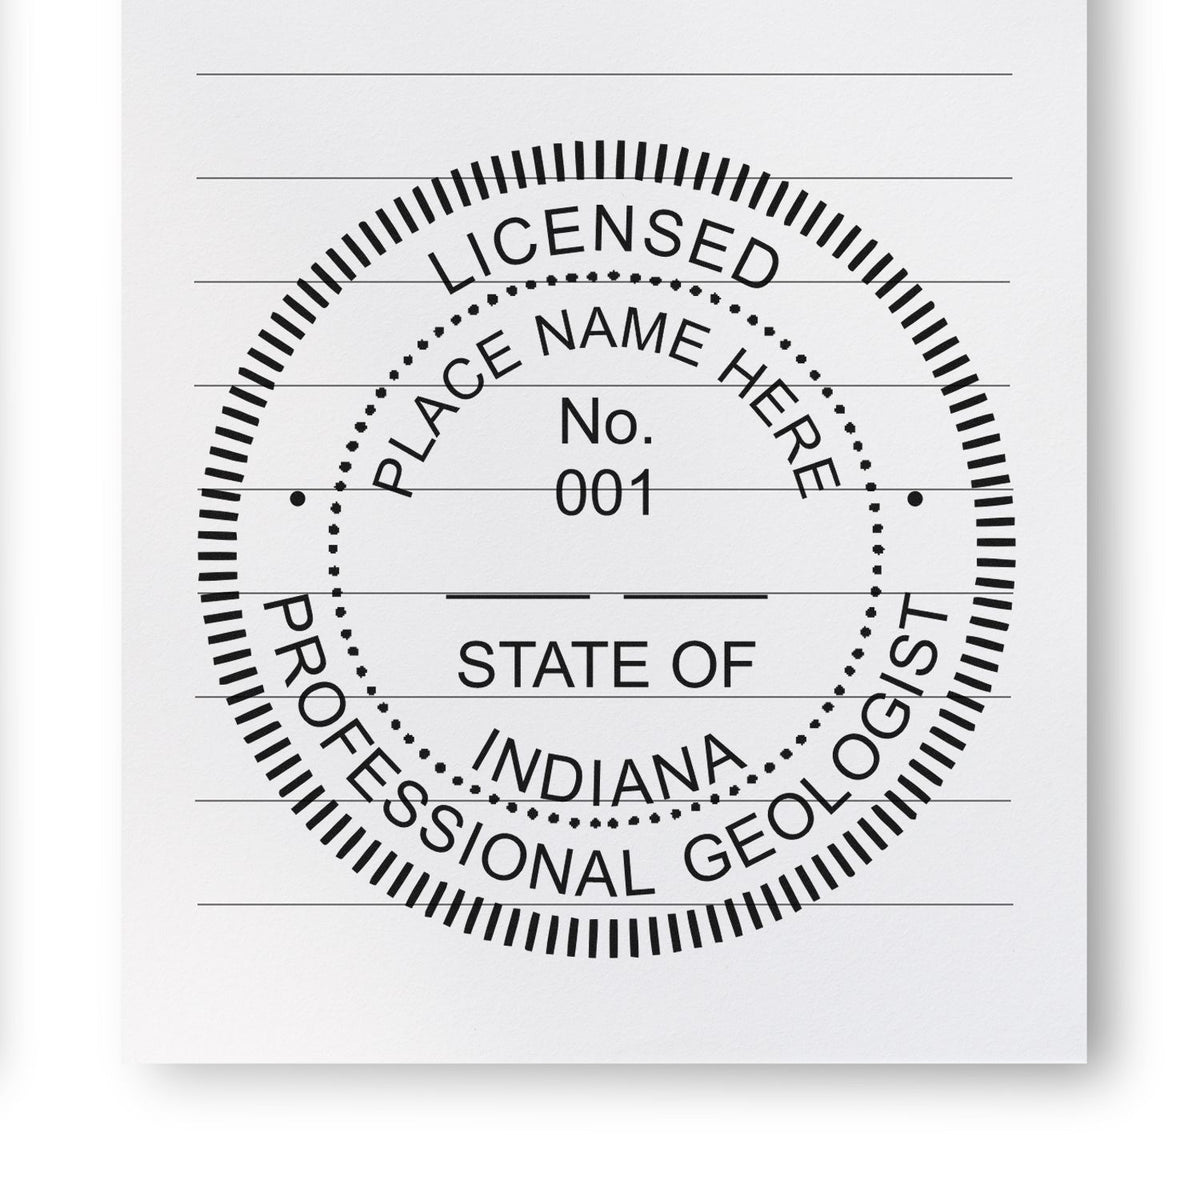 A photograph of the Slim Pre-Inked Indiana Professional Geologist Seal Stamp  impression reveals a vivid, professional image of the on paper.